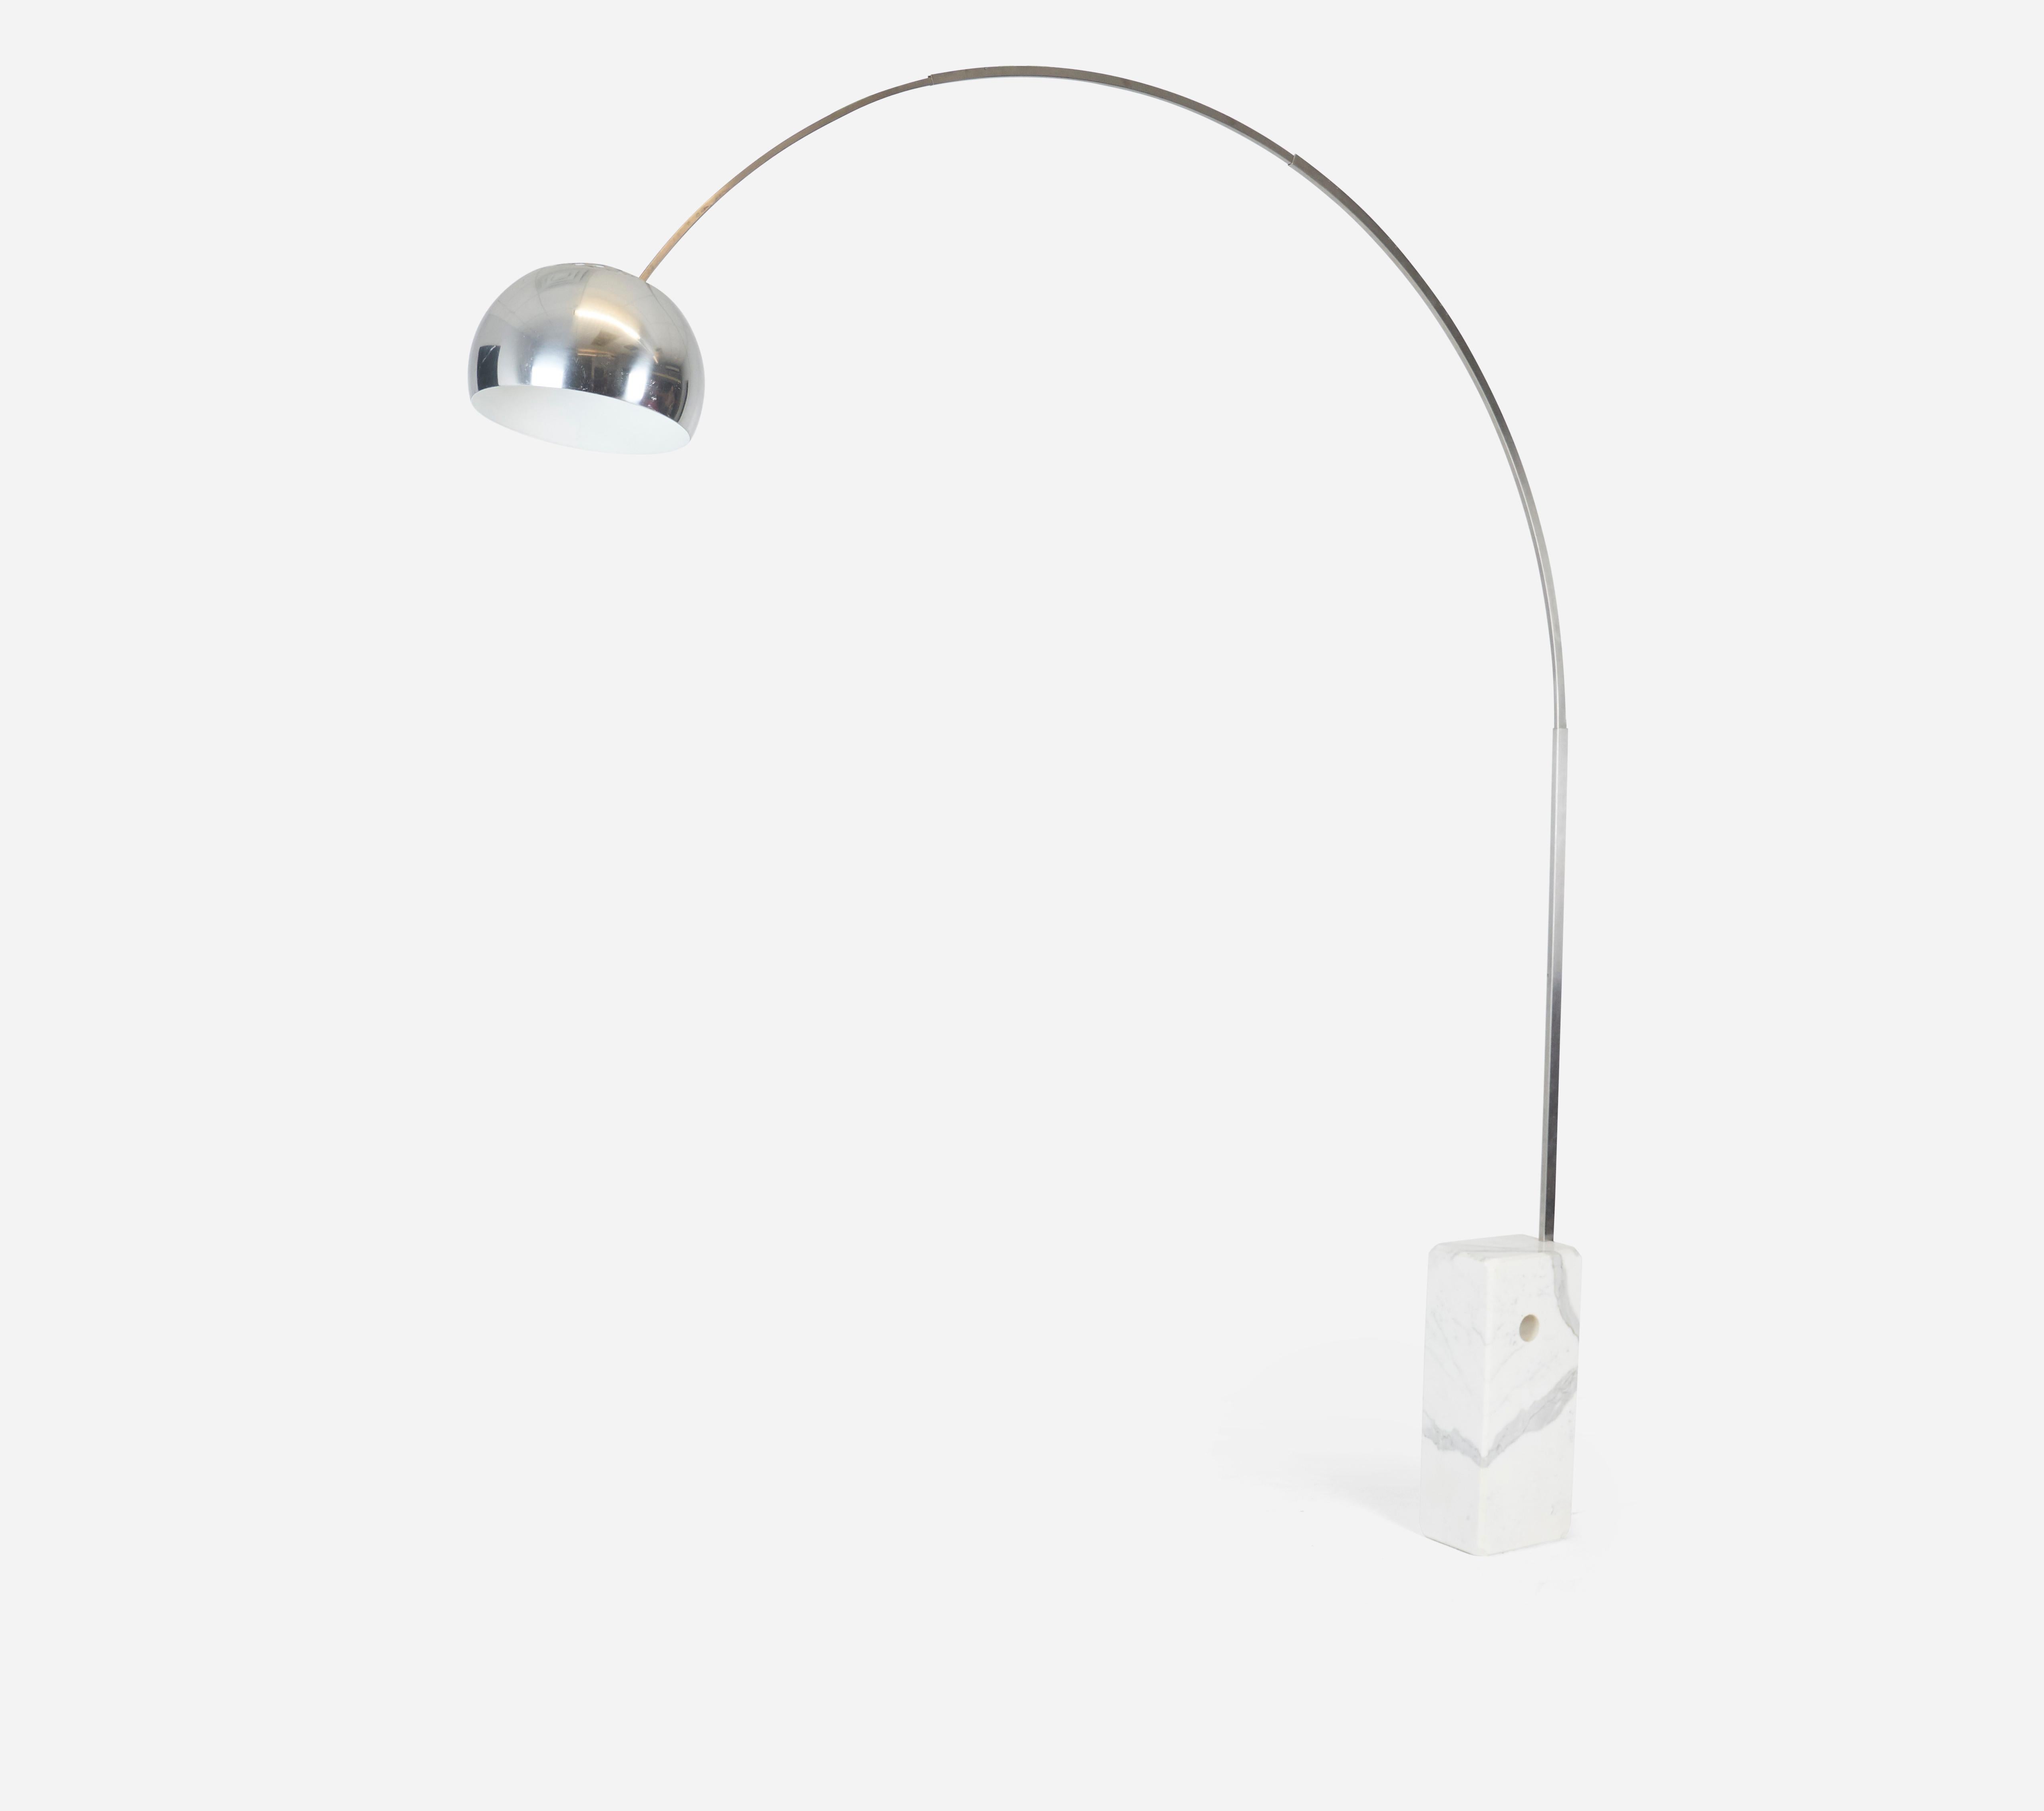 Classic arco lamp by Achille Castiglione for Flos. Made in Italy, circa 1960s. Carrara marble base, steel arc, chrome lamp shade.